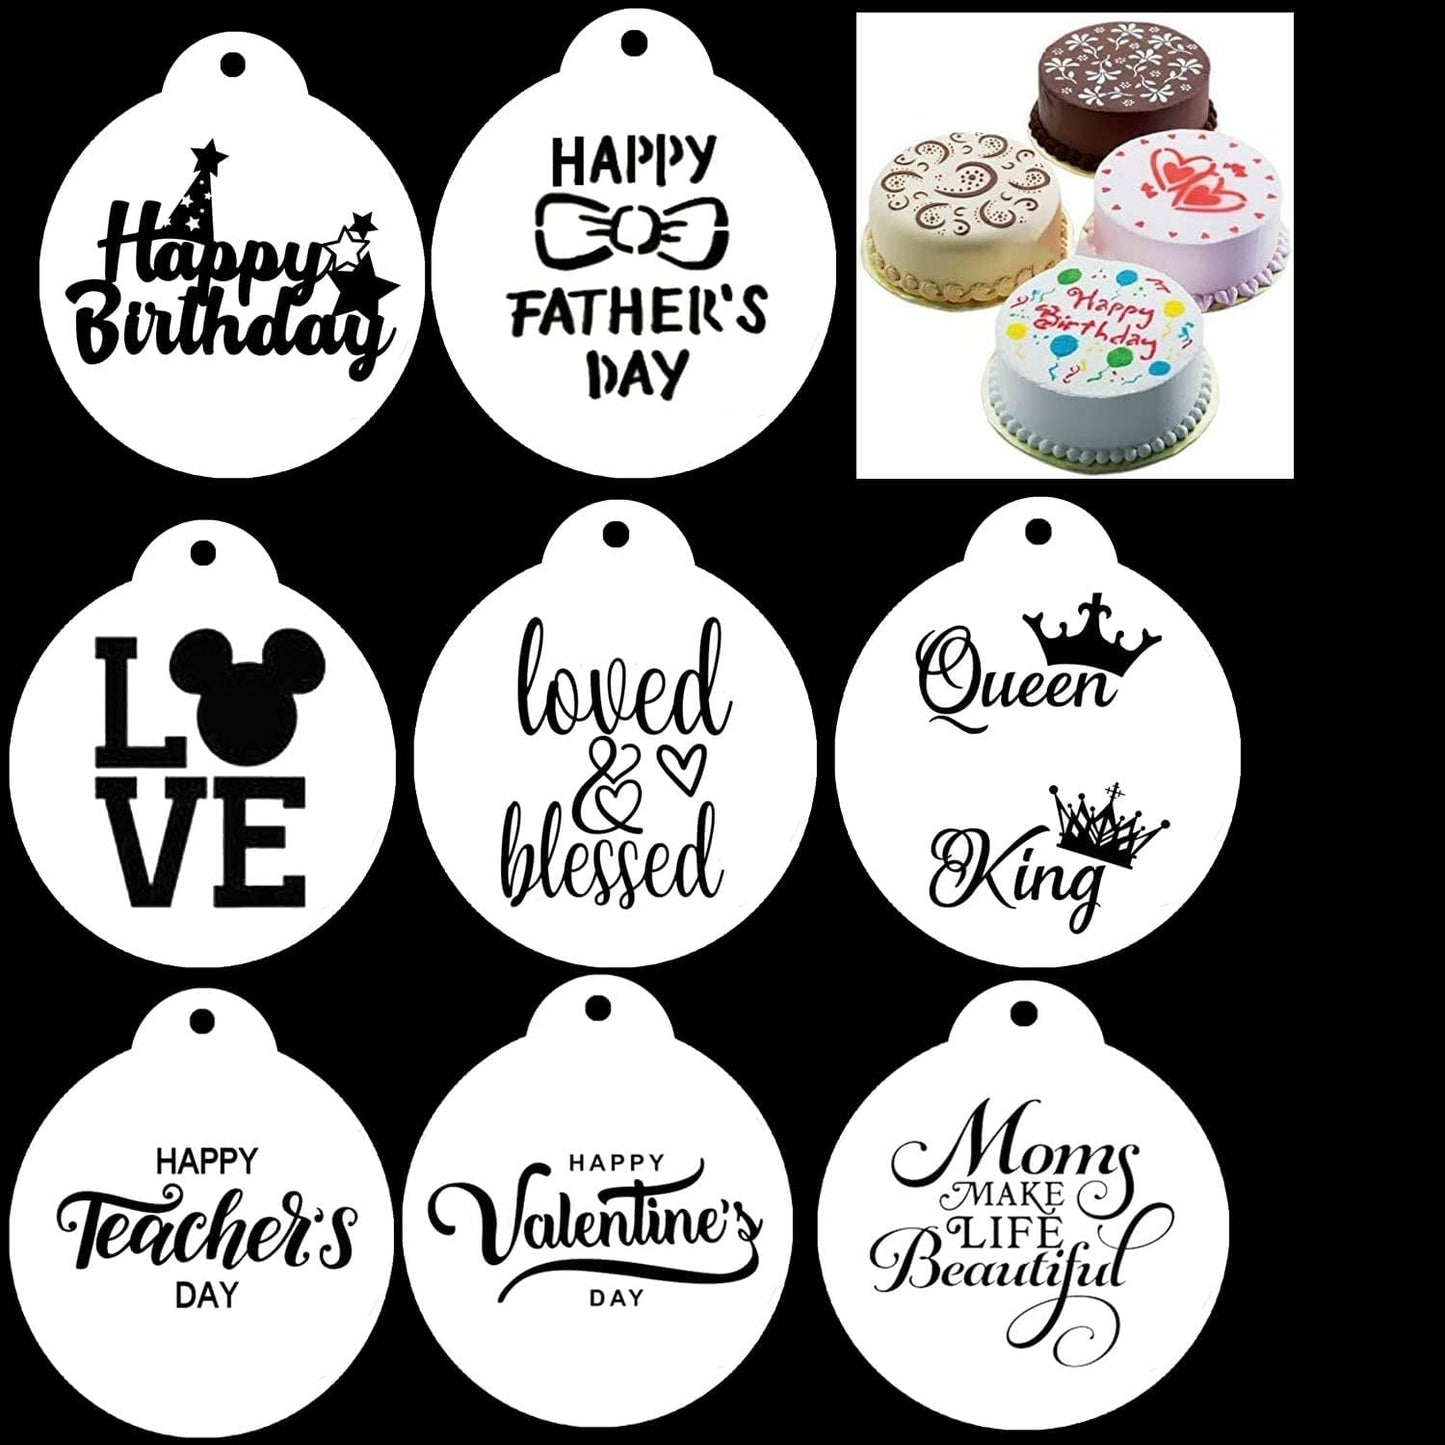 Top Cake Stencils Design 7.9 inches Pack of 8